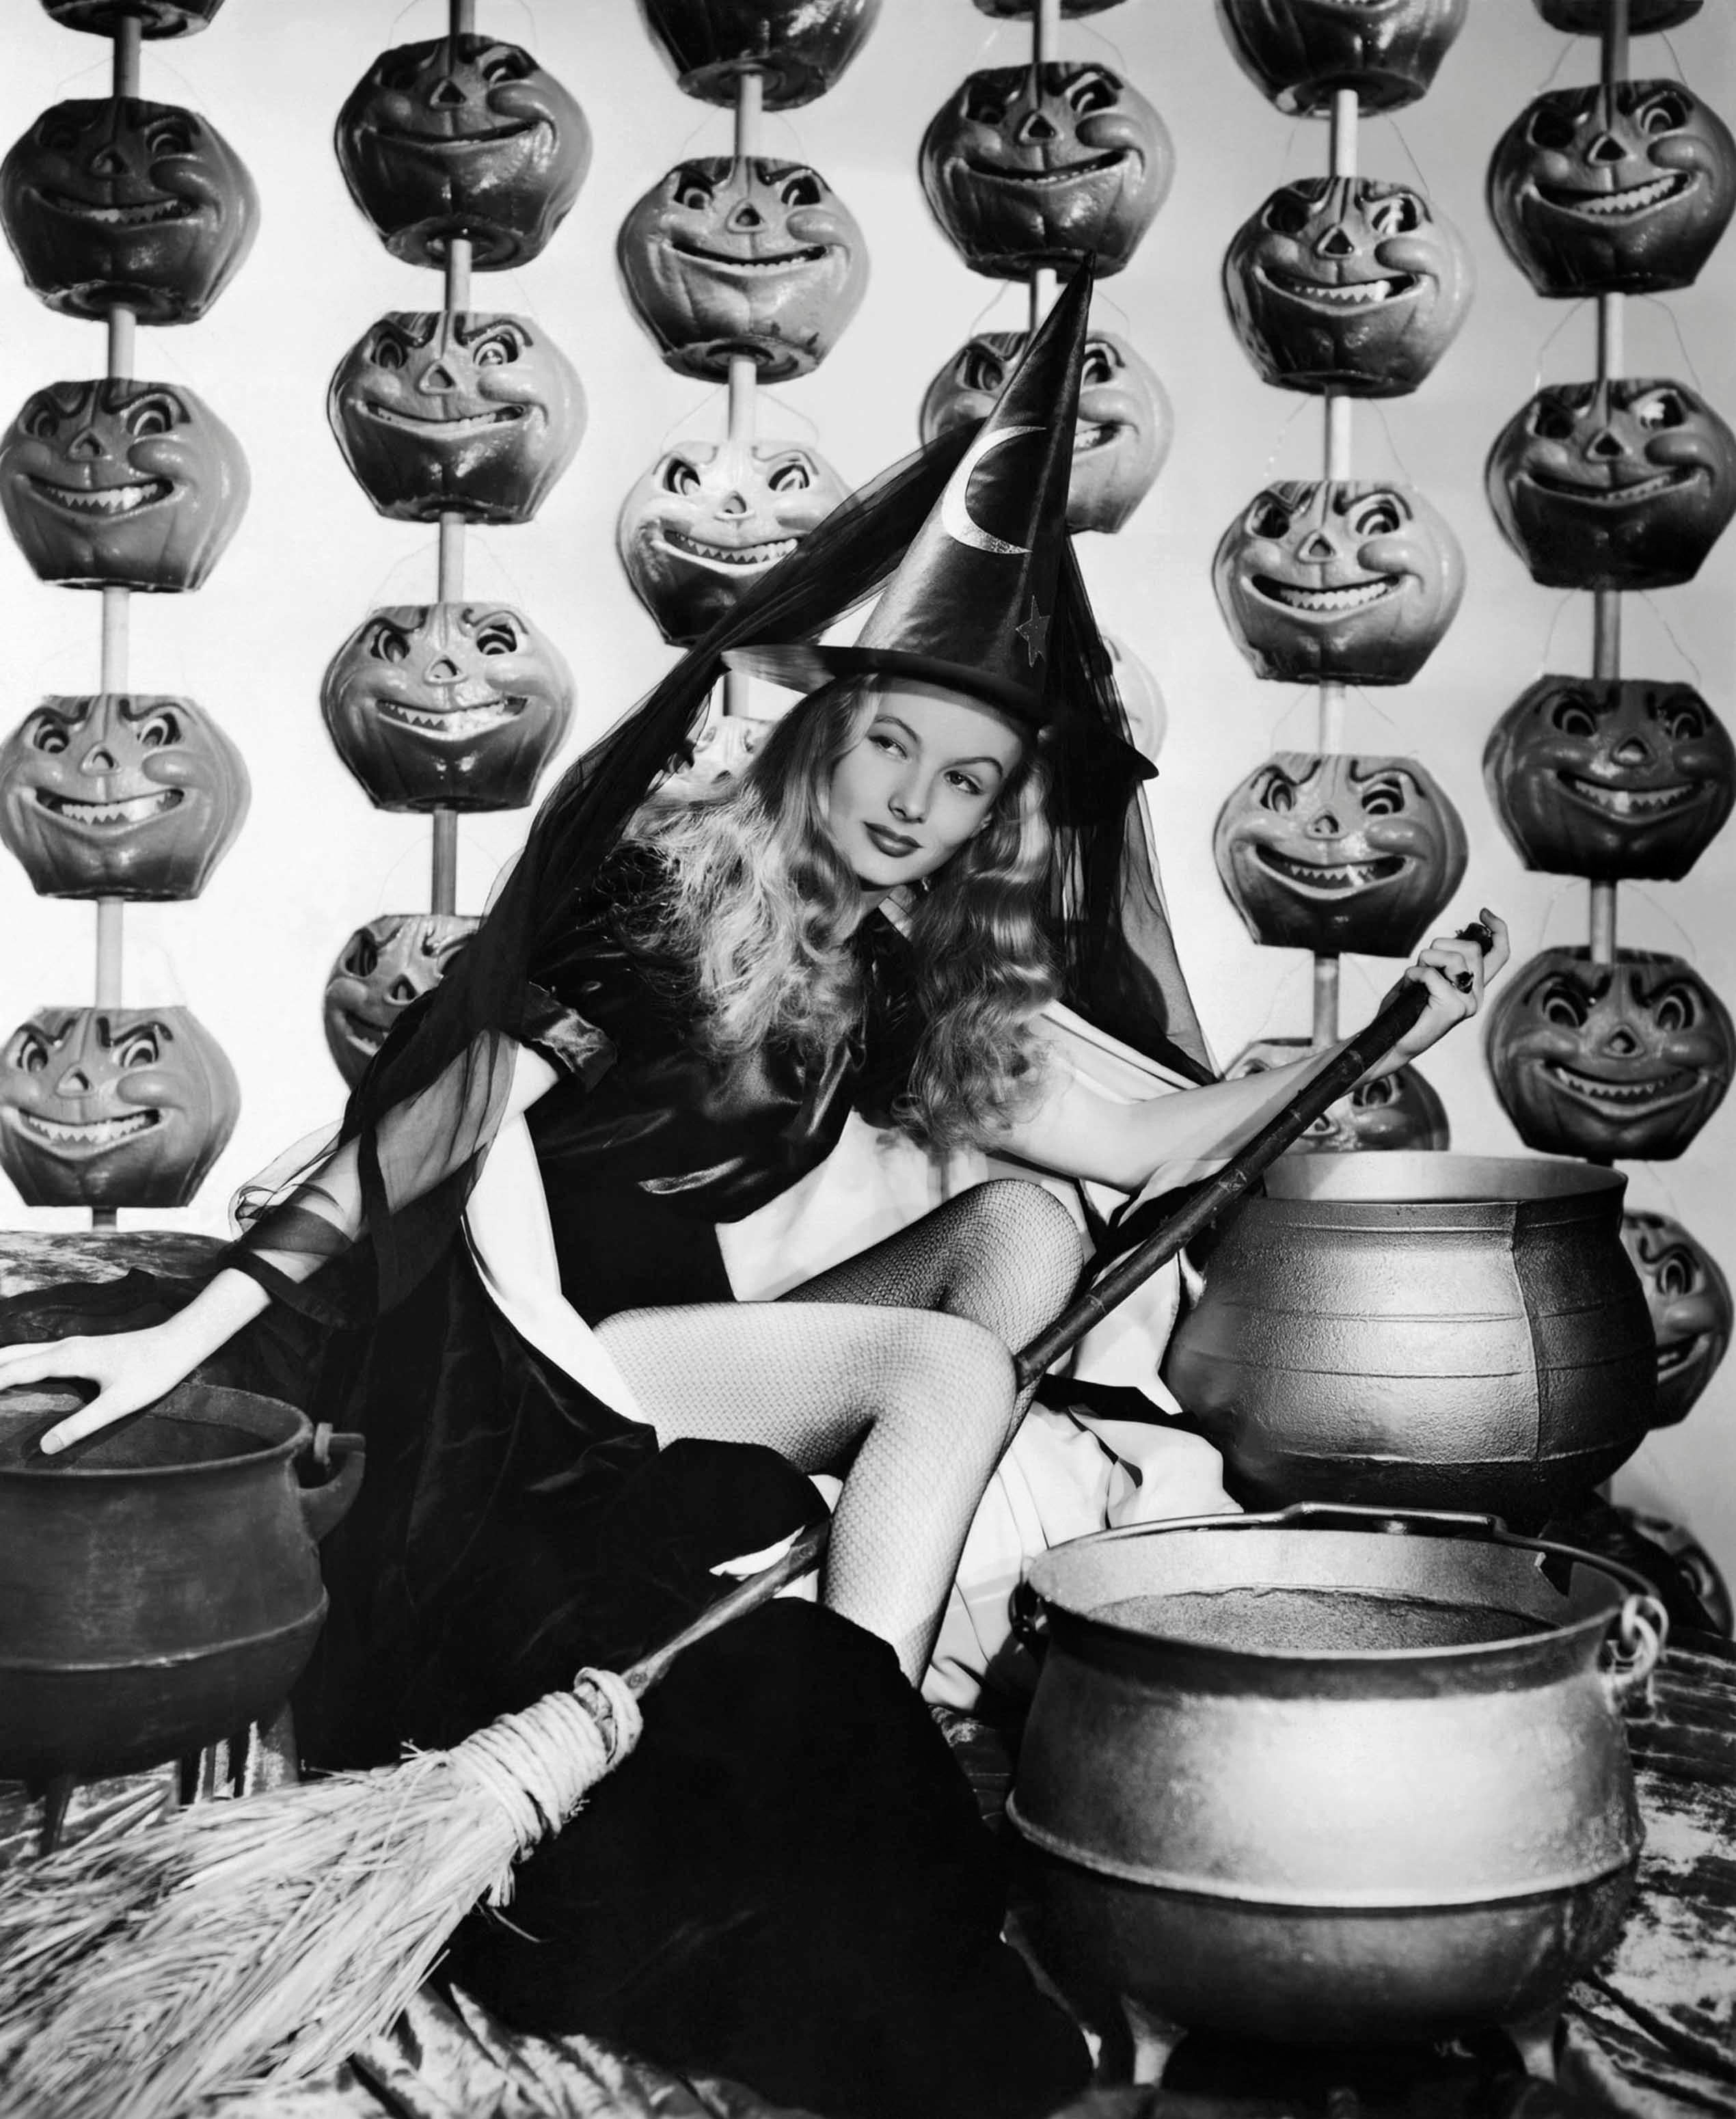 Unknown Black and White Photograph - Veronica Lake "I Married a Witch" Globe Photos Fine Art Print